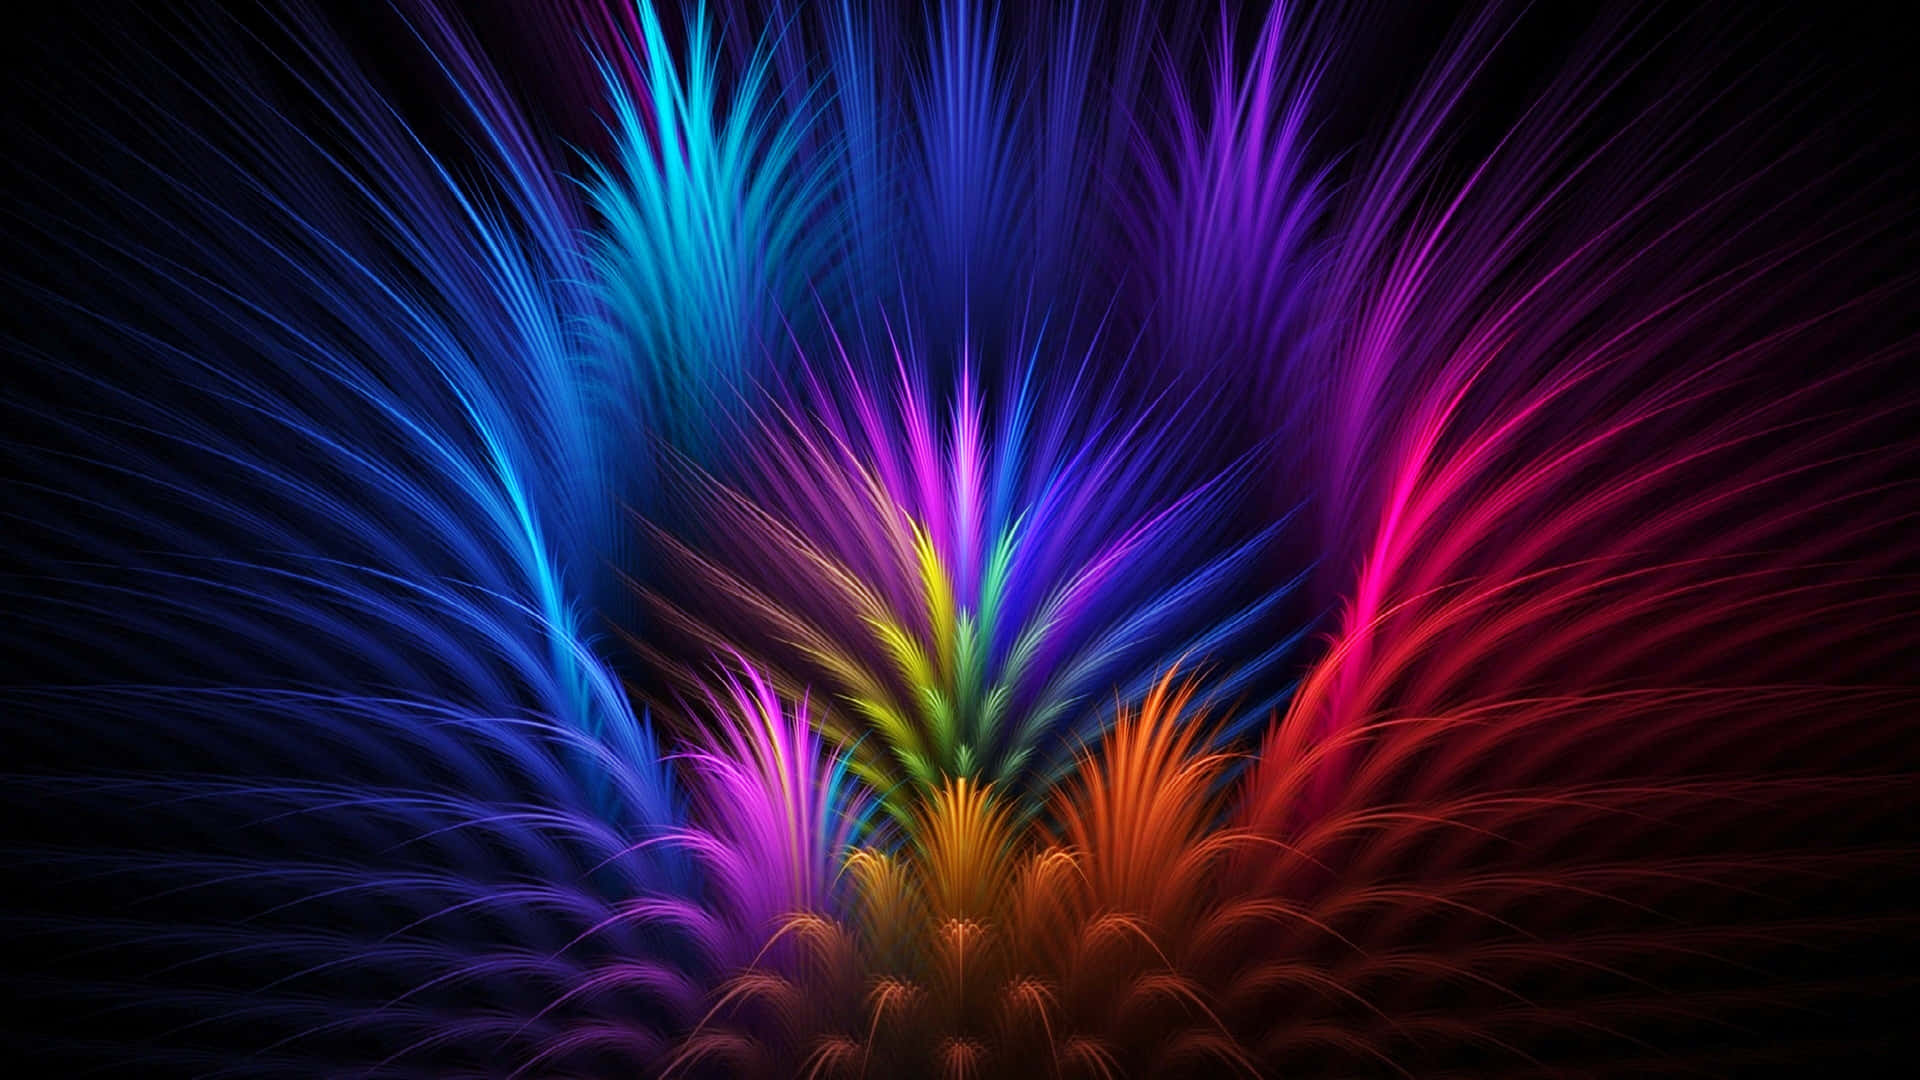 Colorful Abstract Background